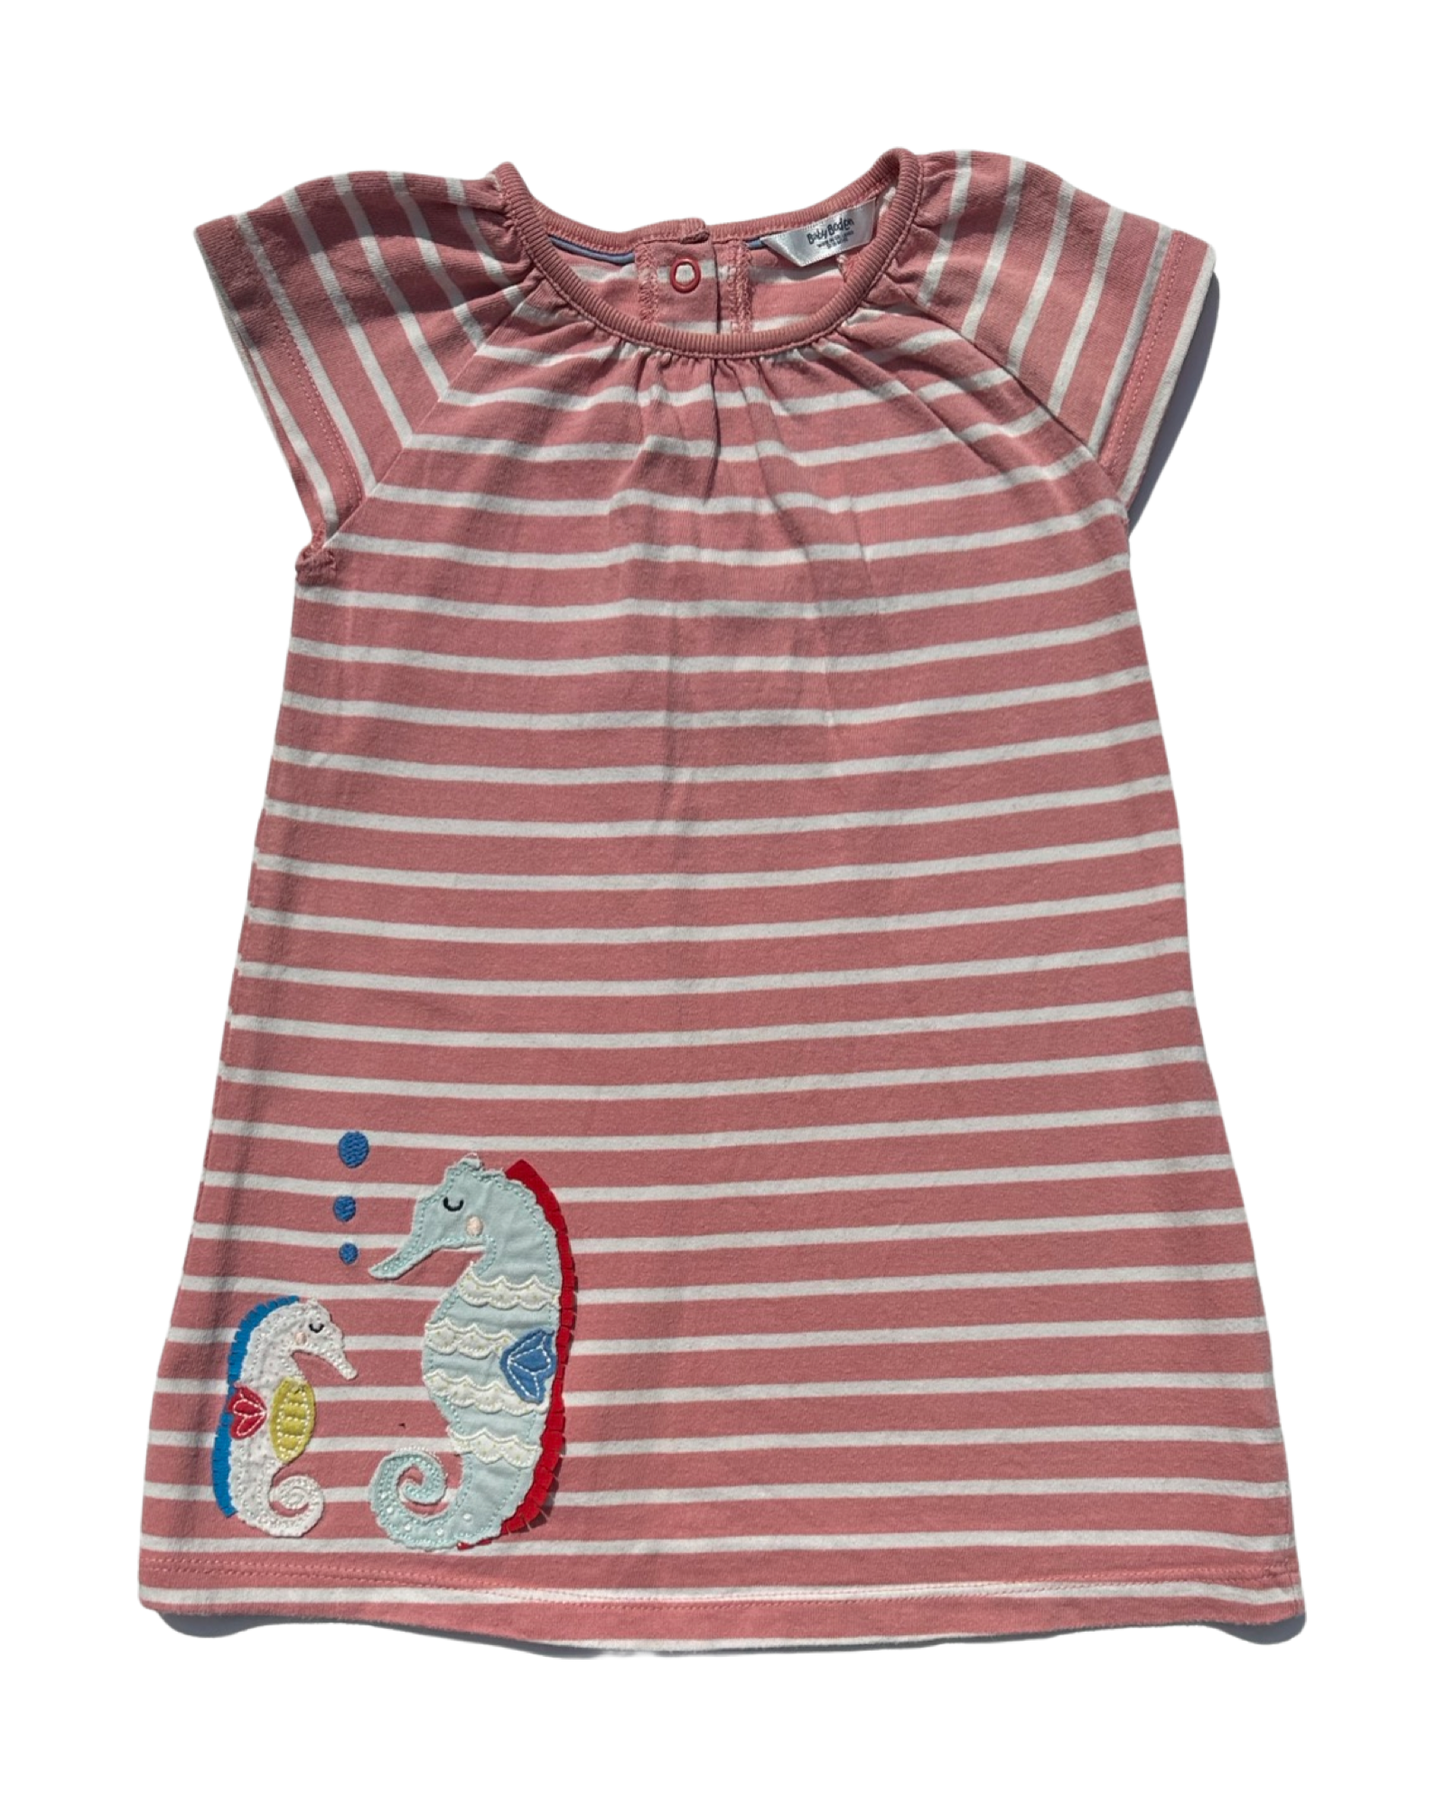 Baby Boden pink striped sea horse dress (size 12-18mths)